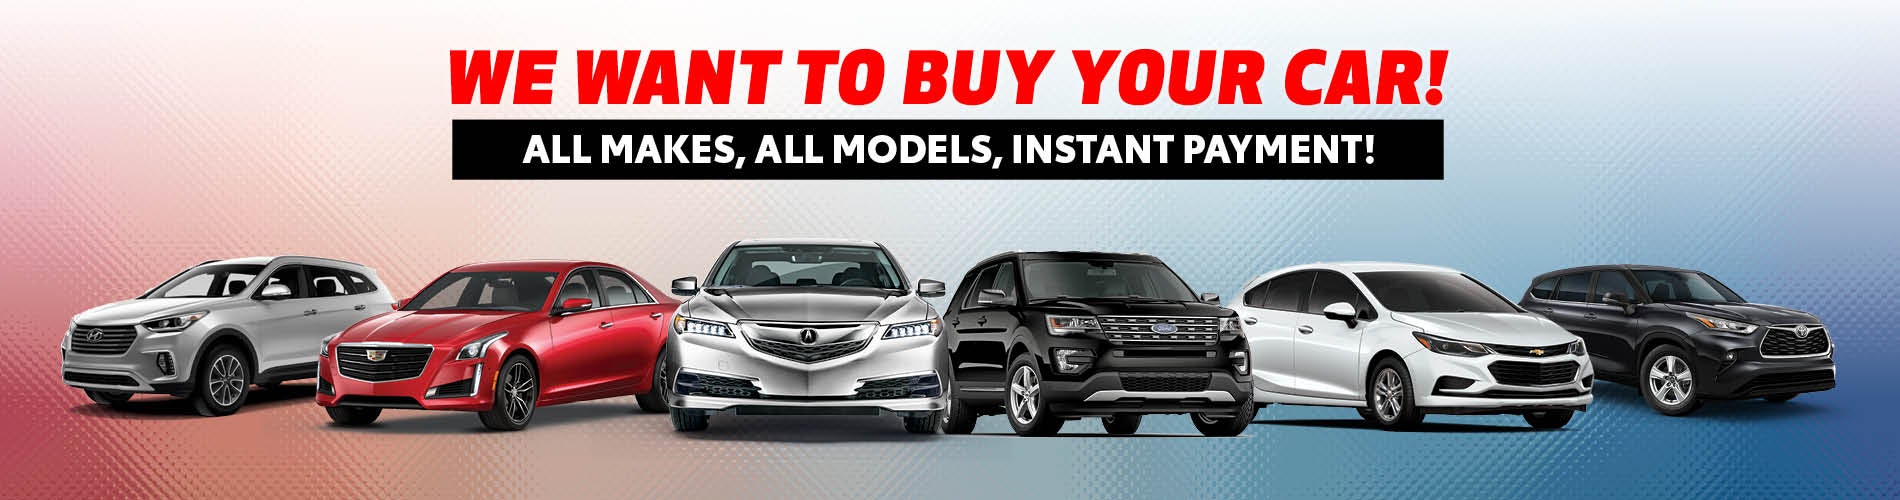 Sell your car